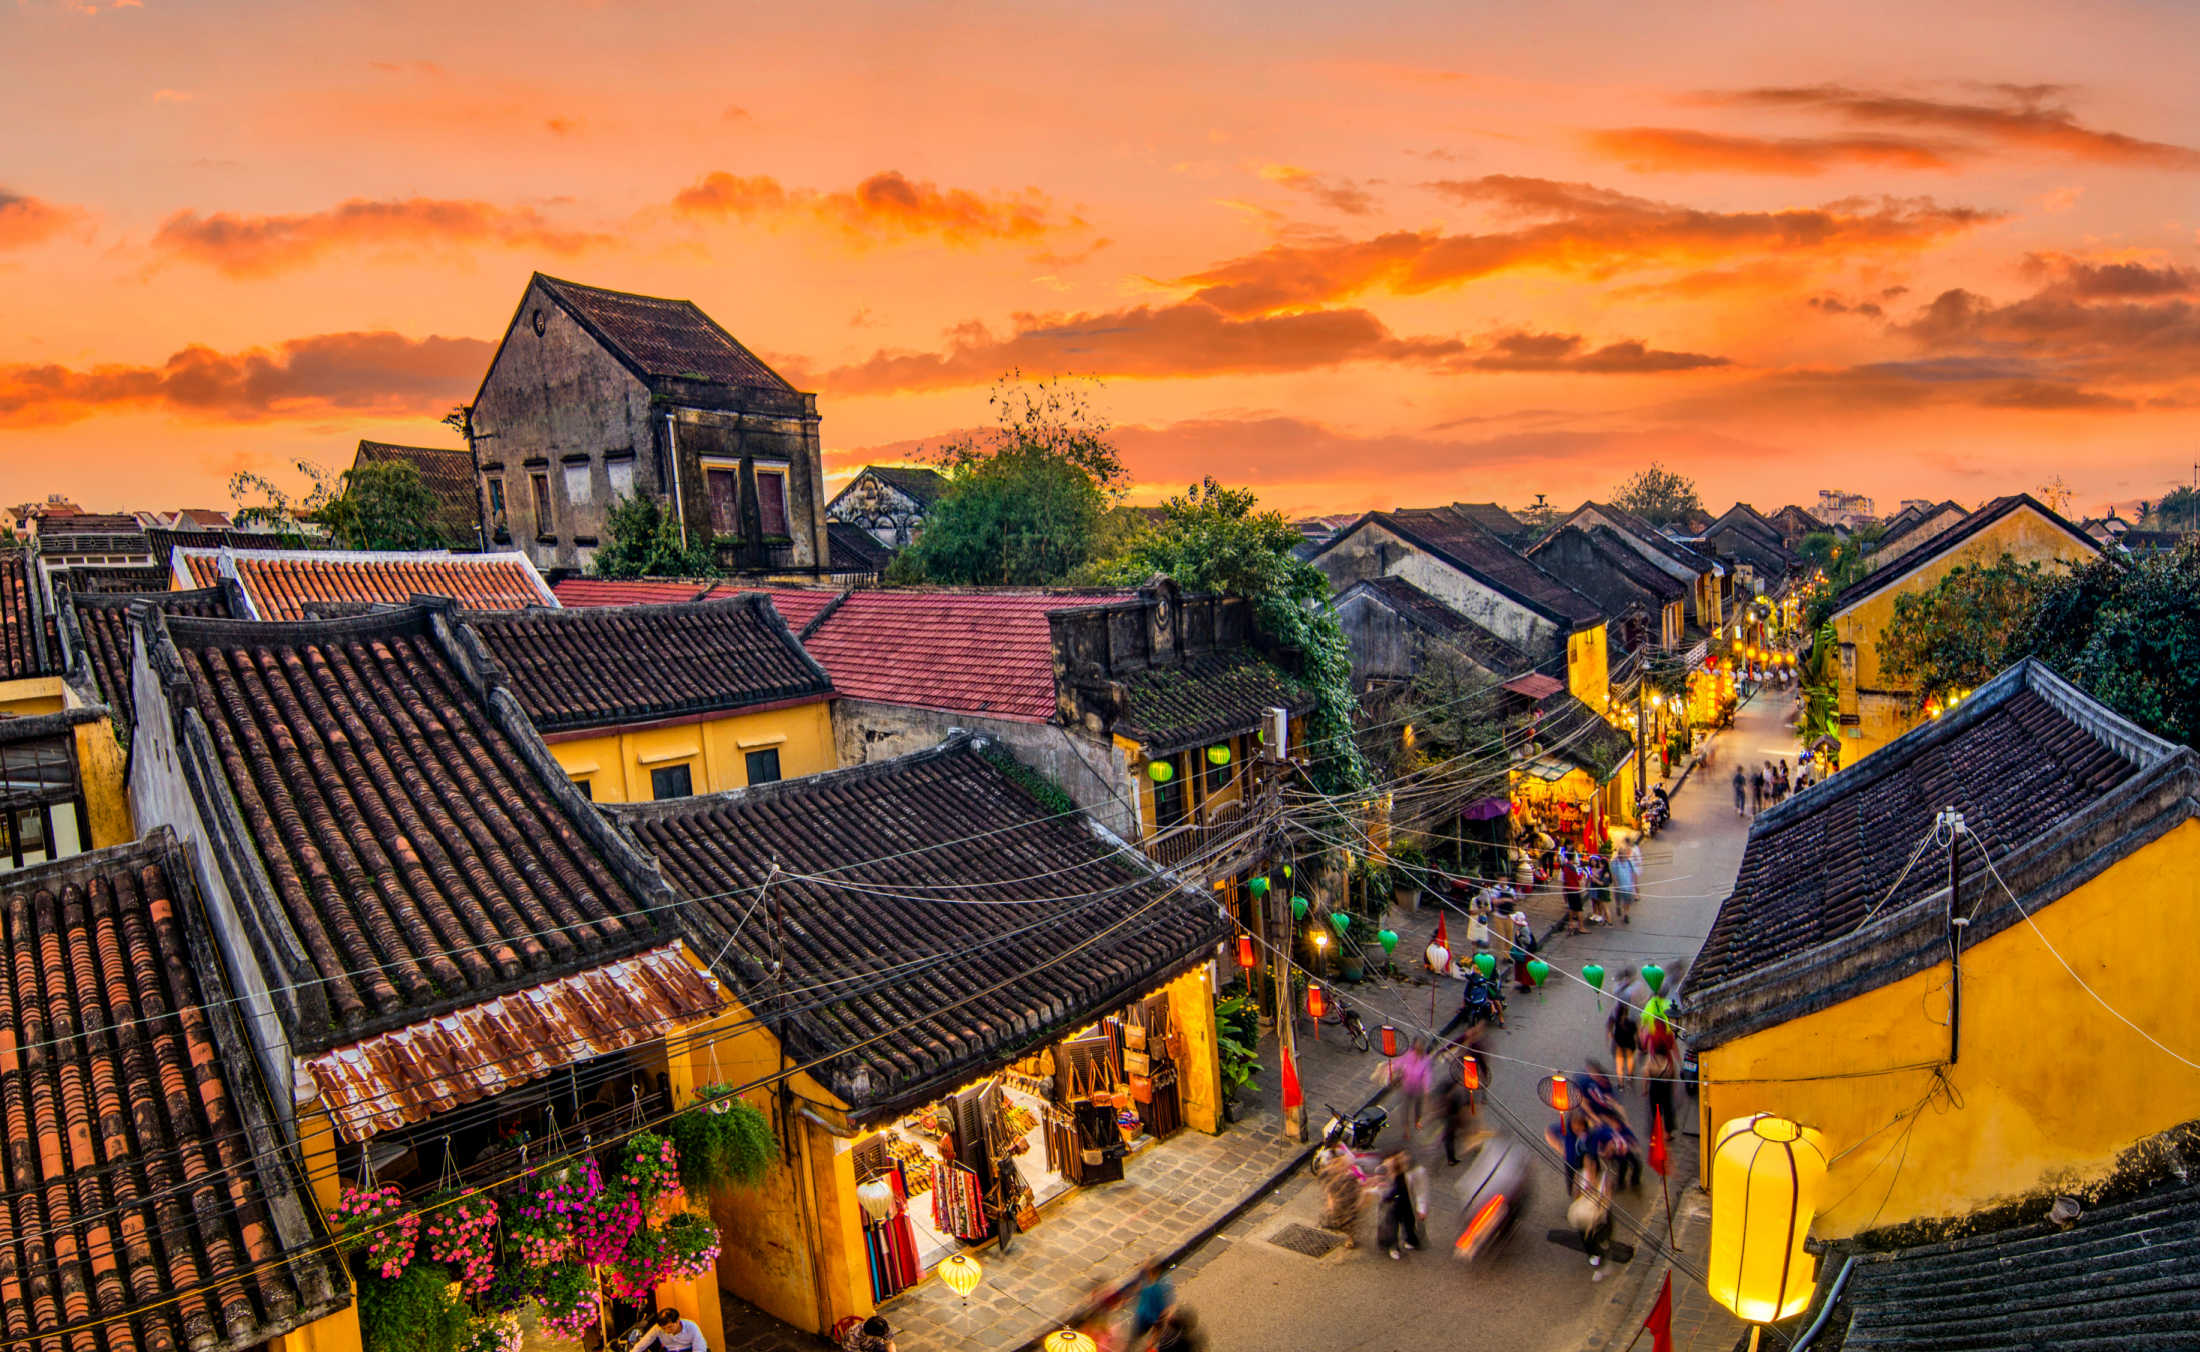 Hoi An, a charming ancient trading port located in central Vietnam